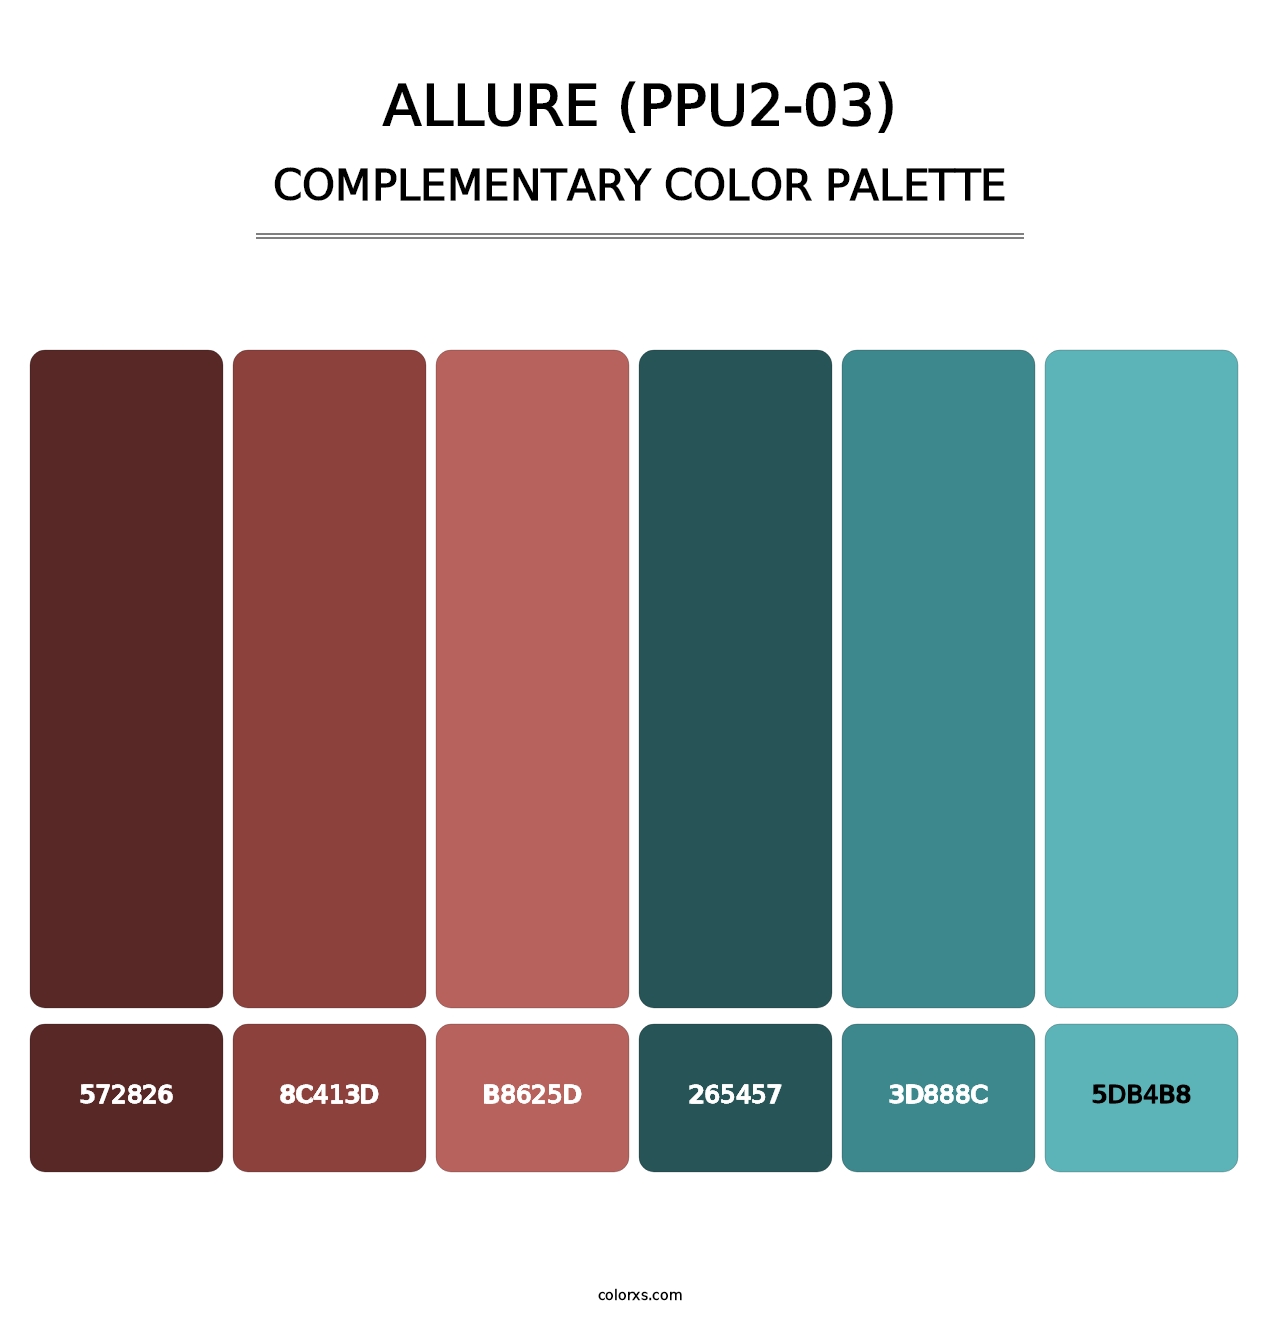 Allure (PPU2-03) - Complementary Color Palette